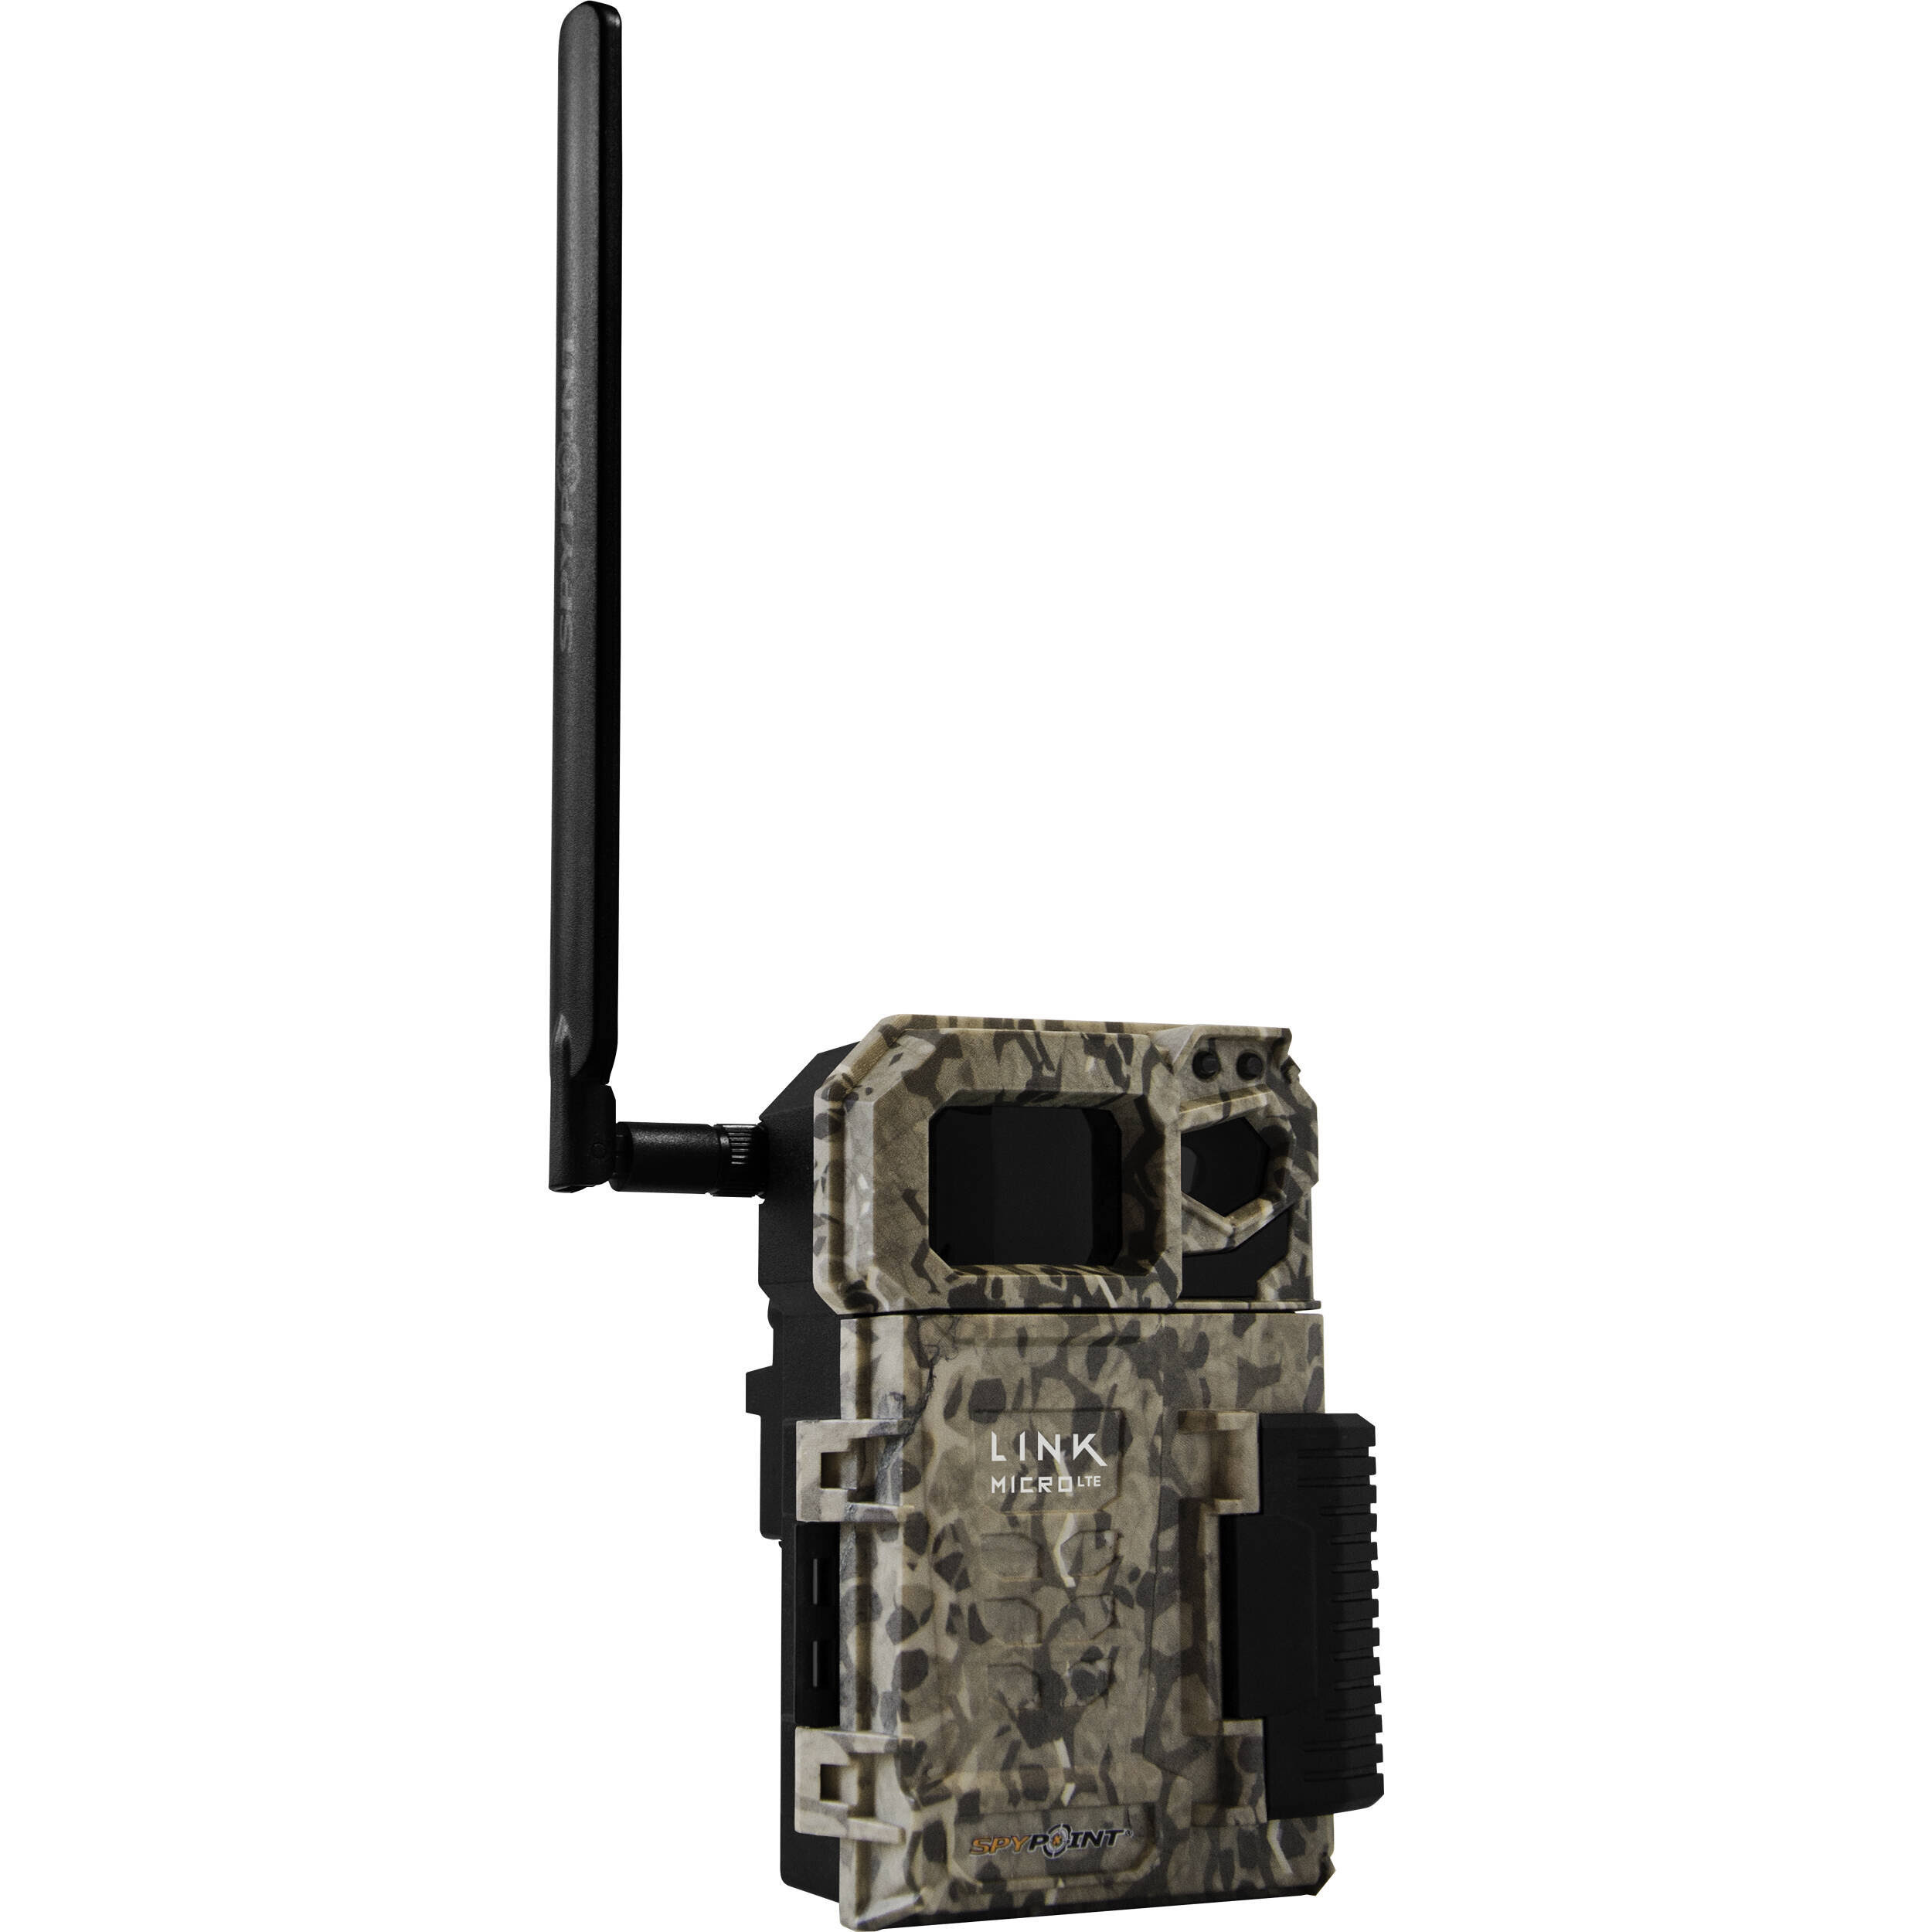 Spypoint LINK-MICRO-LTE Cellular Trail Camera (AT&T Data Plan)